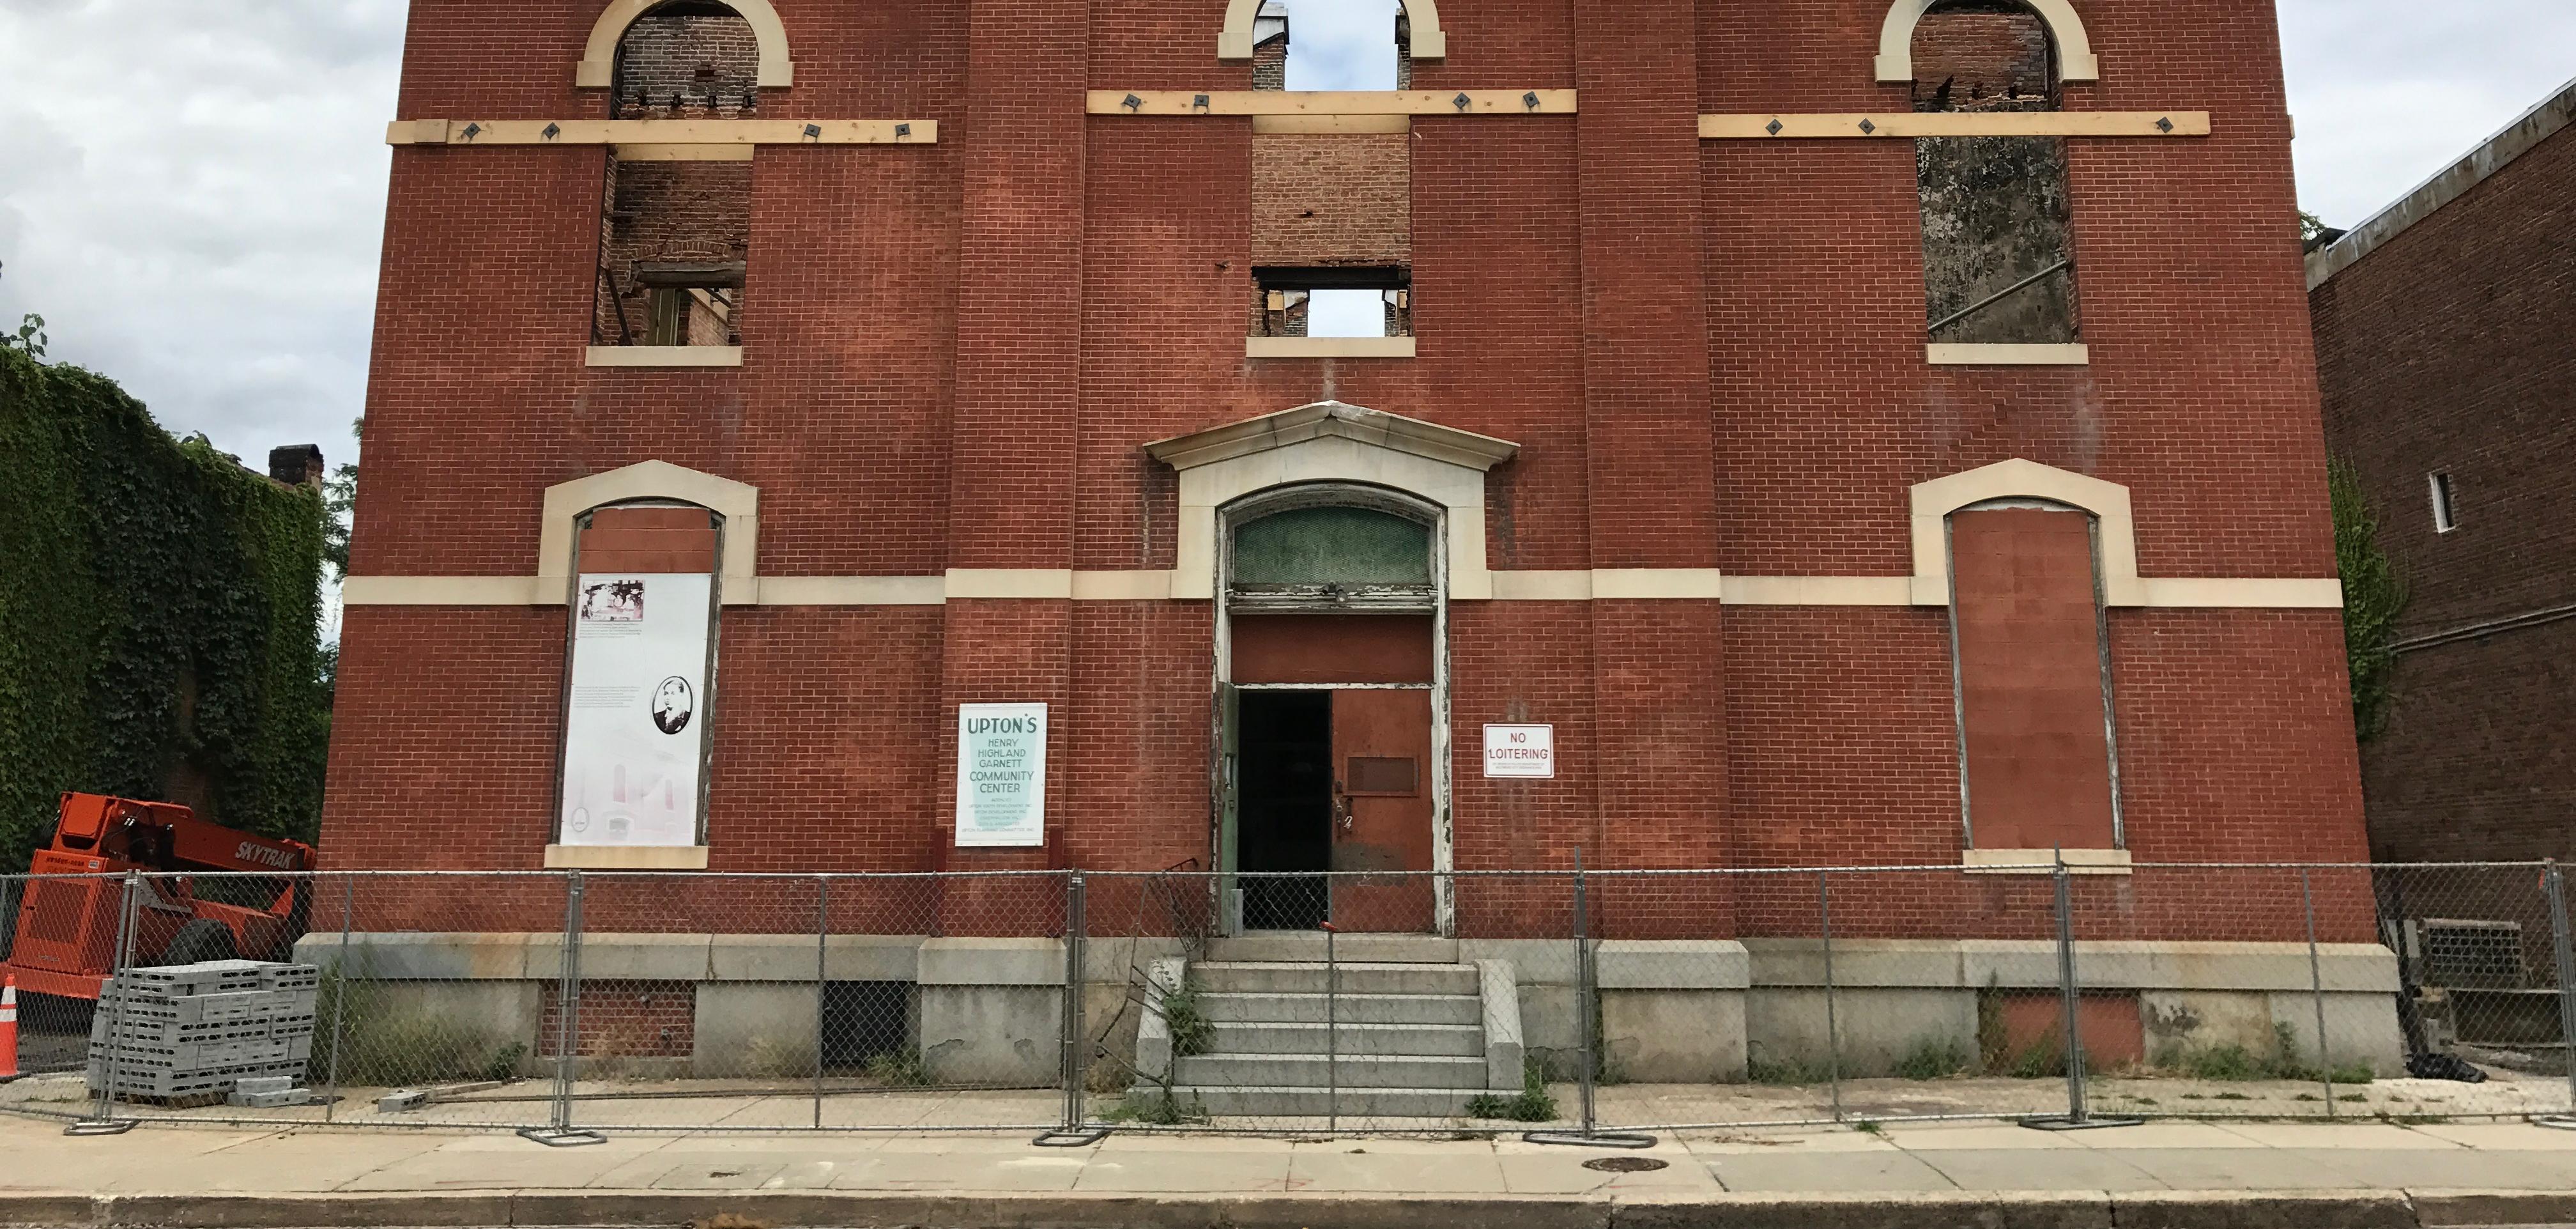 Public School 103, Division Street, Baltimore, MD (Photo by Eli Pousson, July 2017)